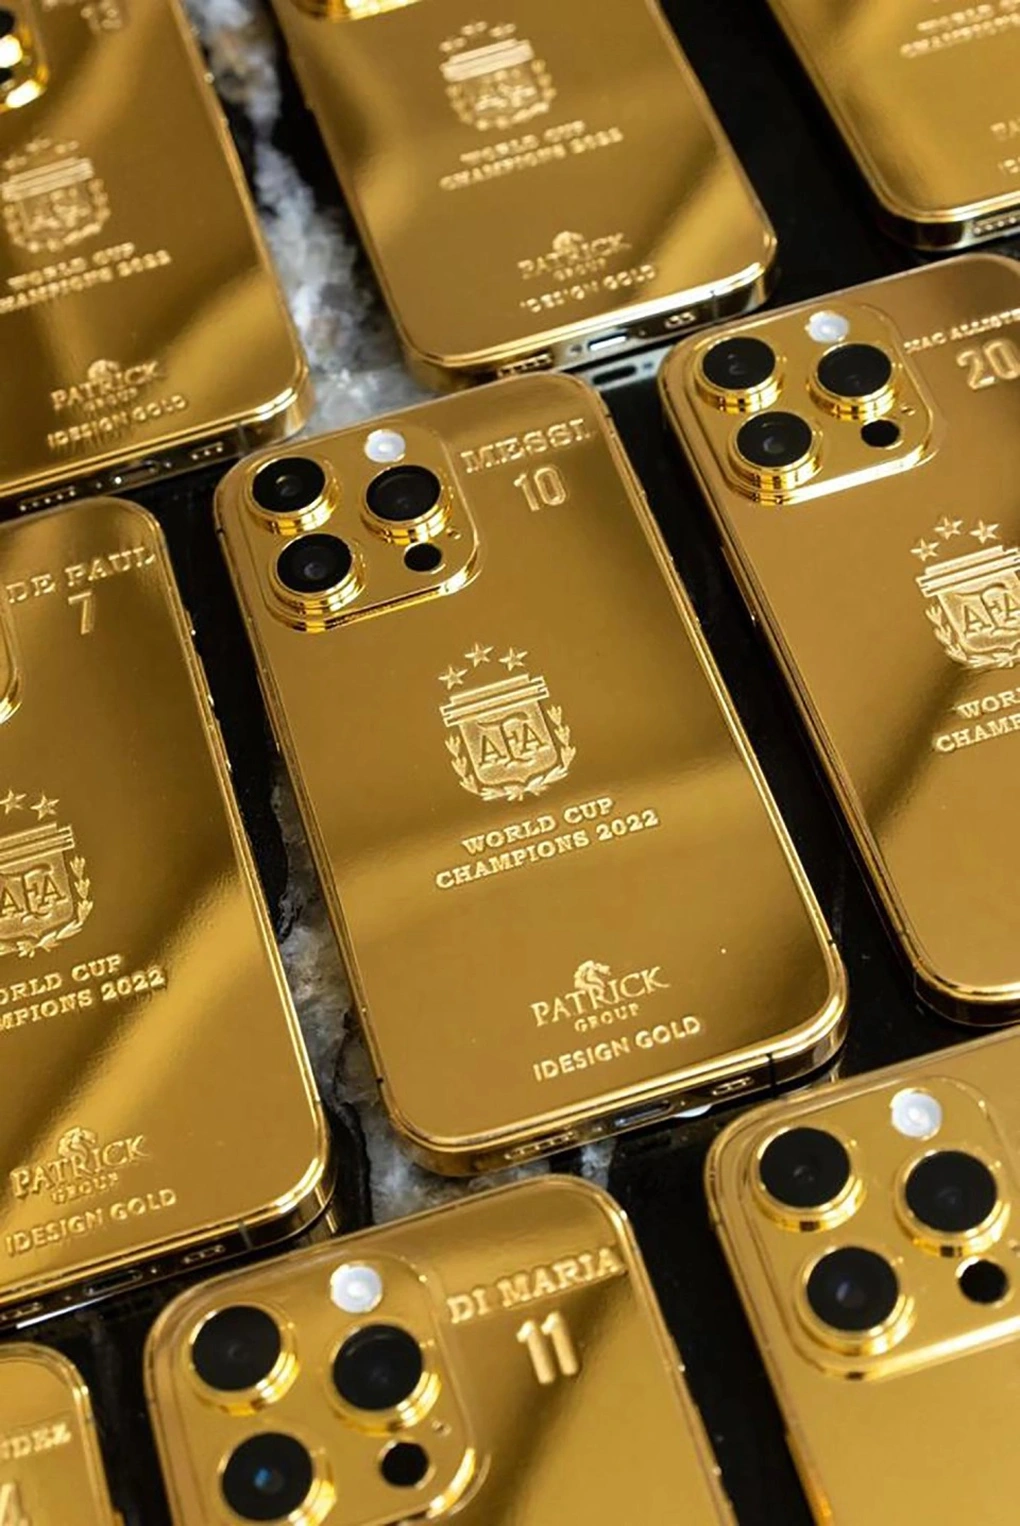 The gold-plated iPhone 14 Pro Max that Messi gave to members of the Argentine football team last March (Photo: iDesign Gold).